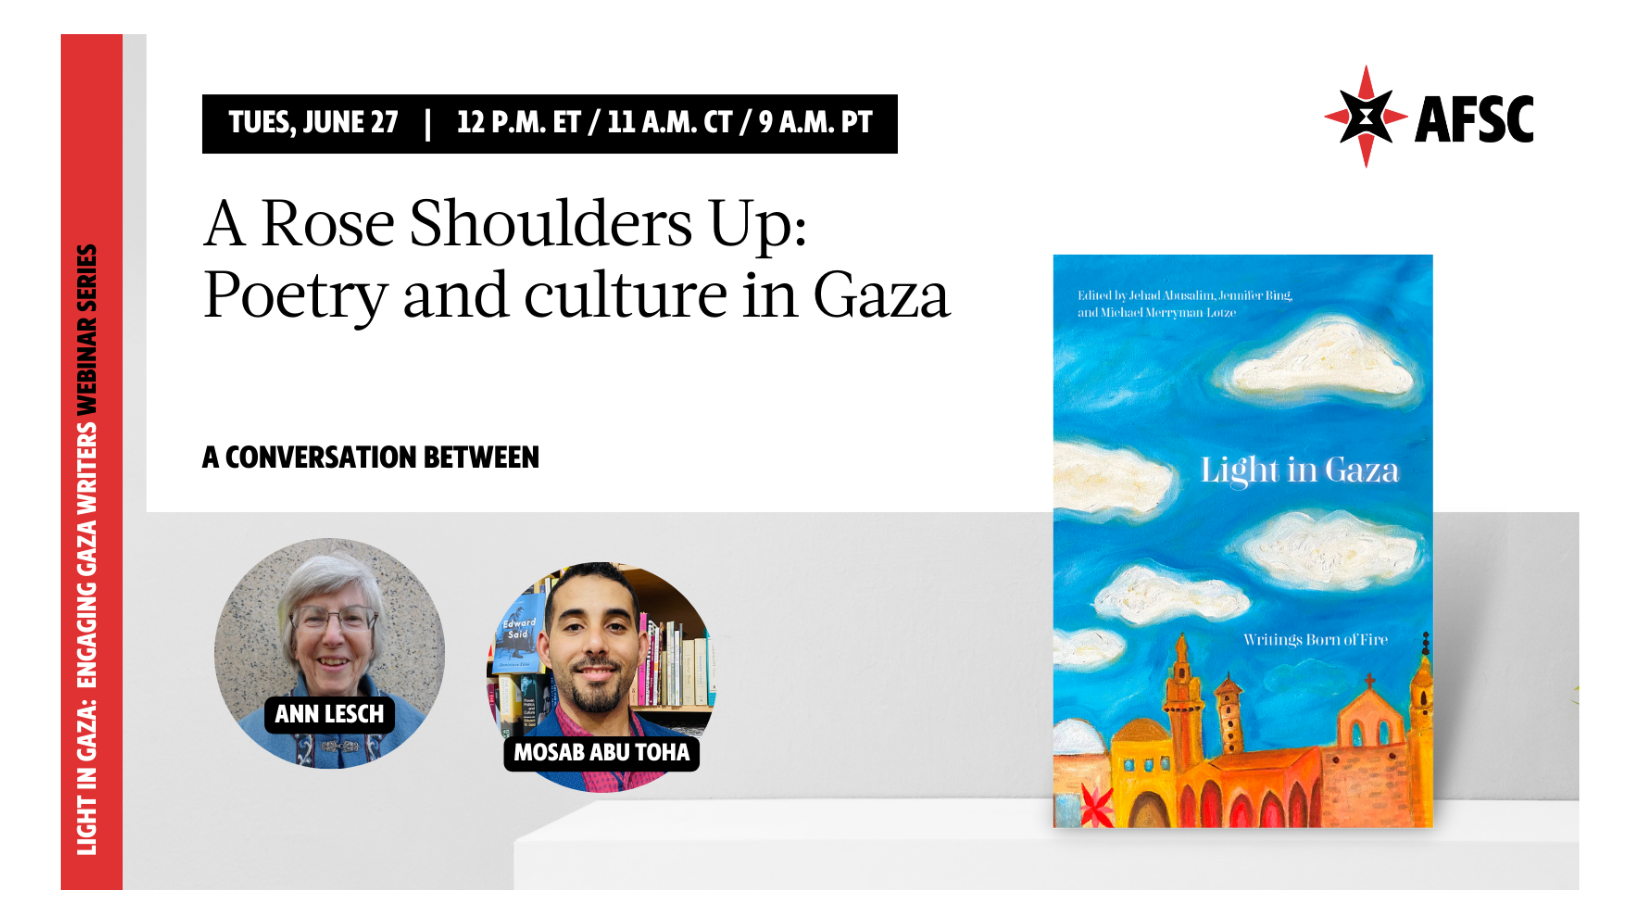 A Rose Shoulders Up: Poetry and Culture in Gaza